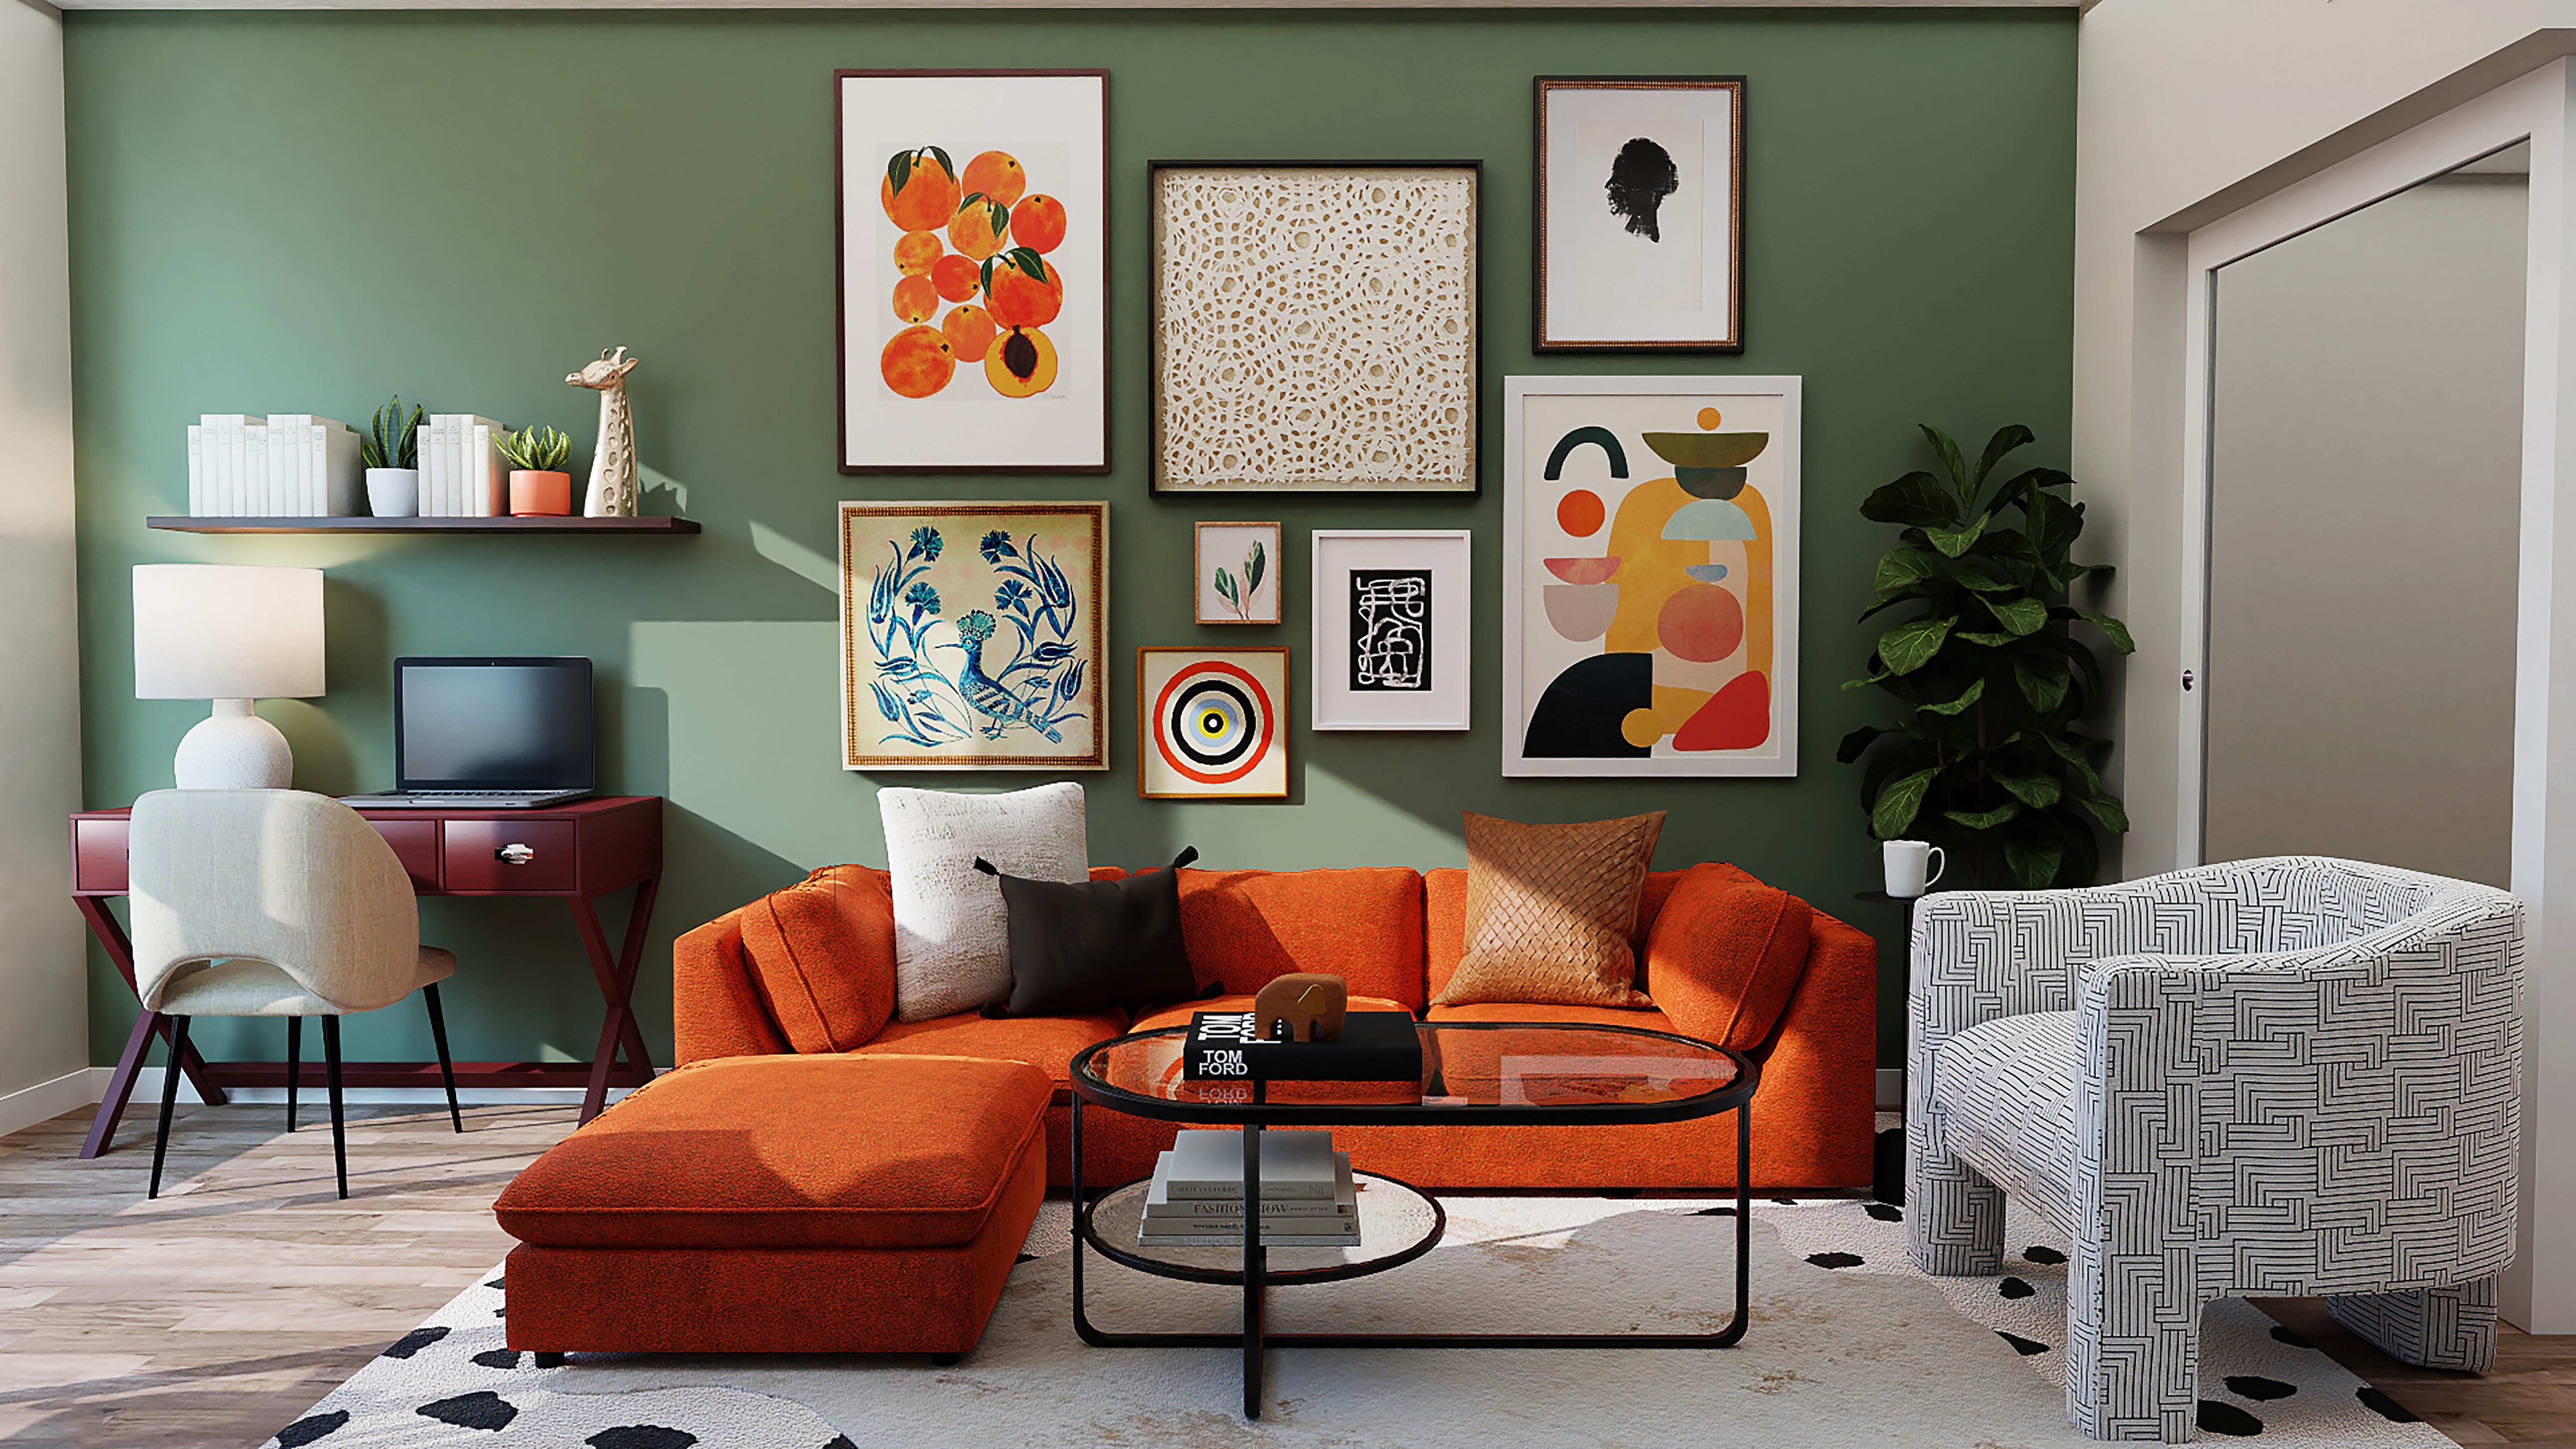 Use niche color combinations to distract the eye from the television in your small living room space. Pictured: A colorful living room.